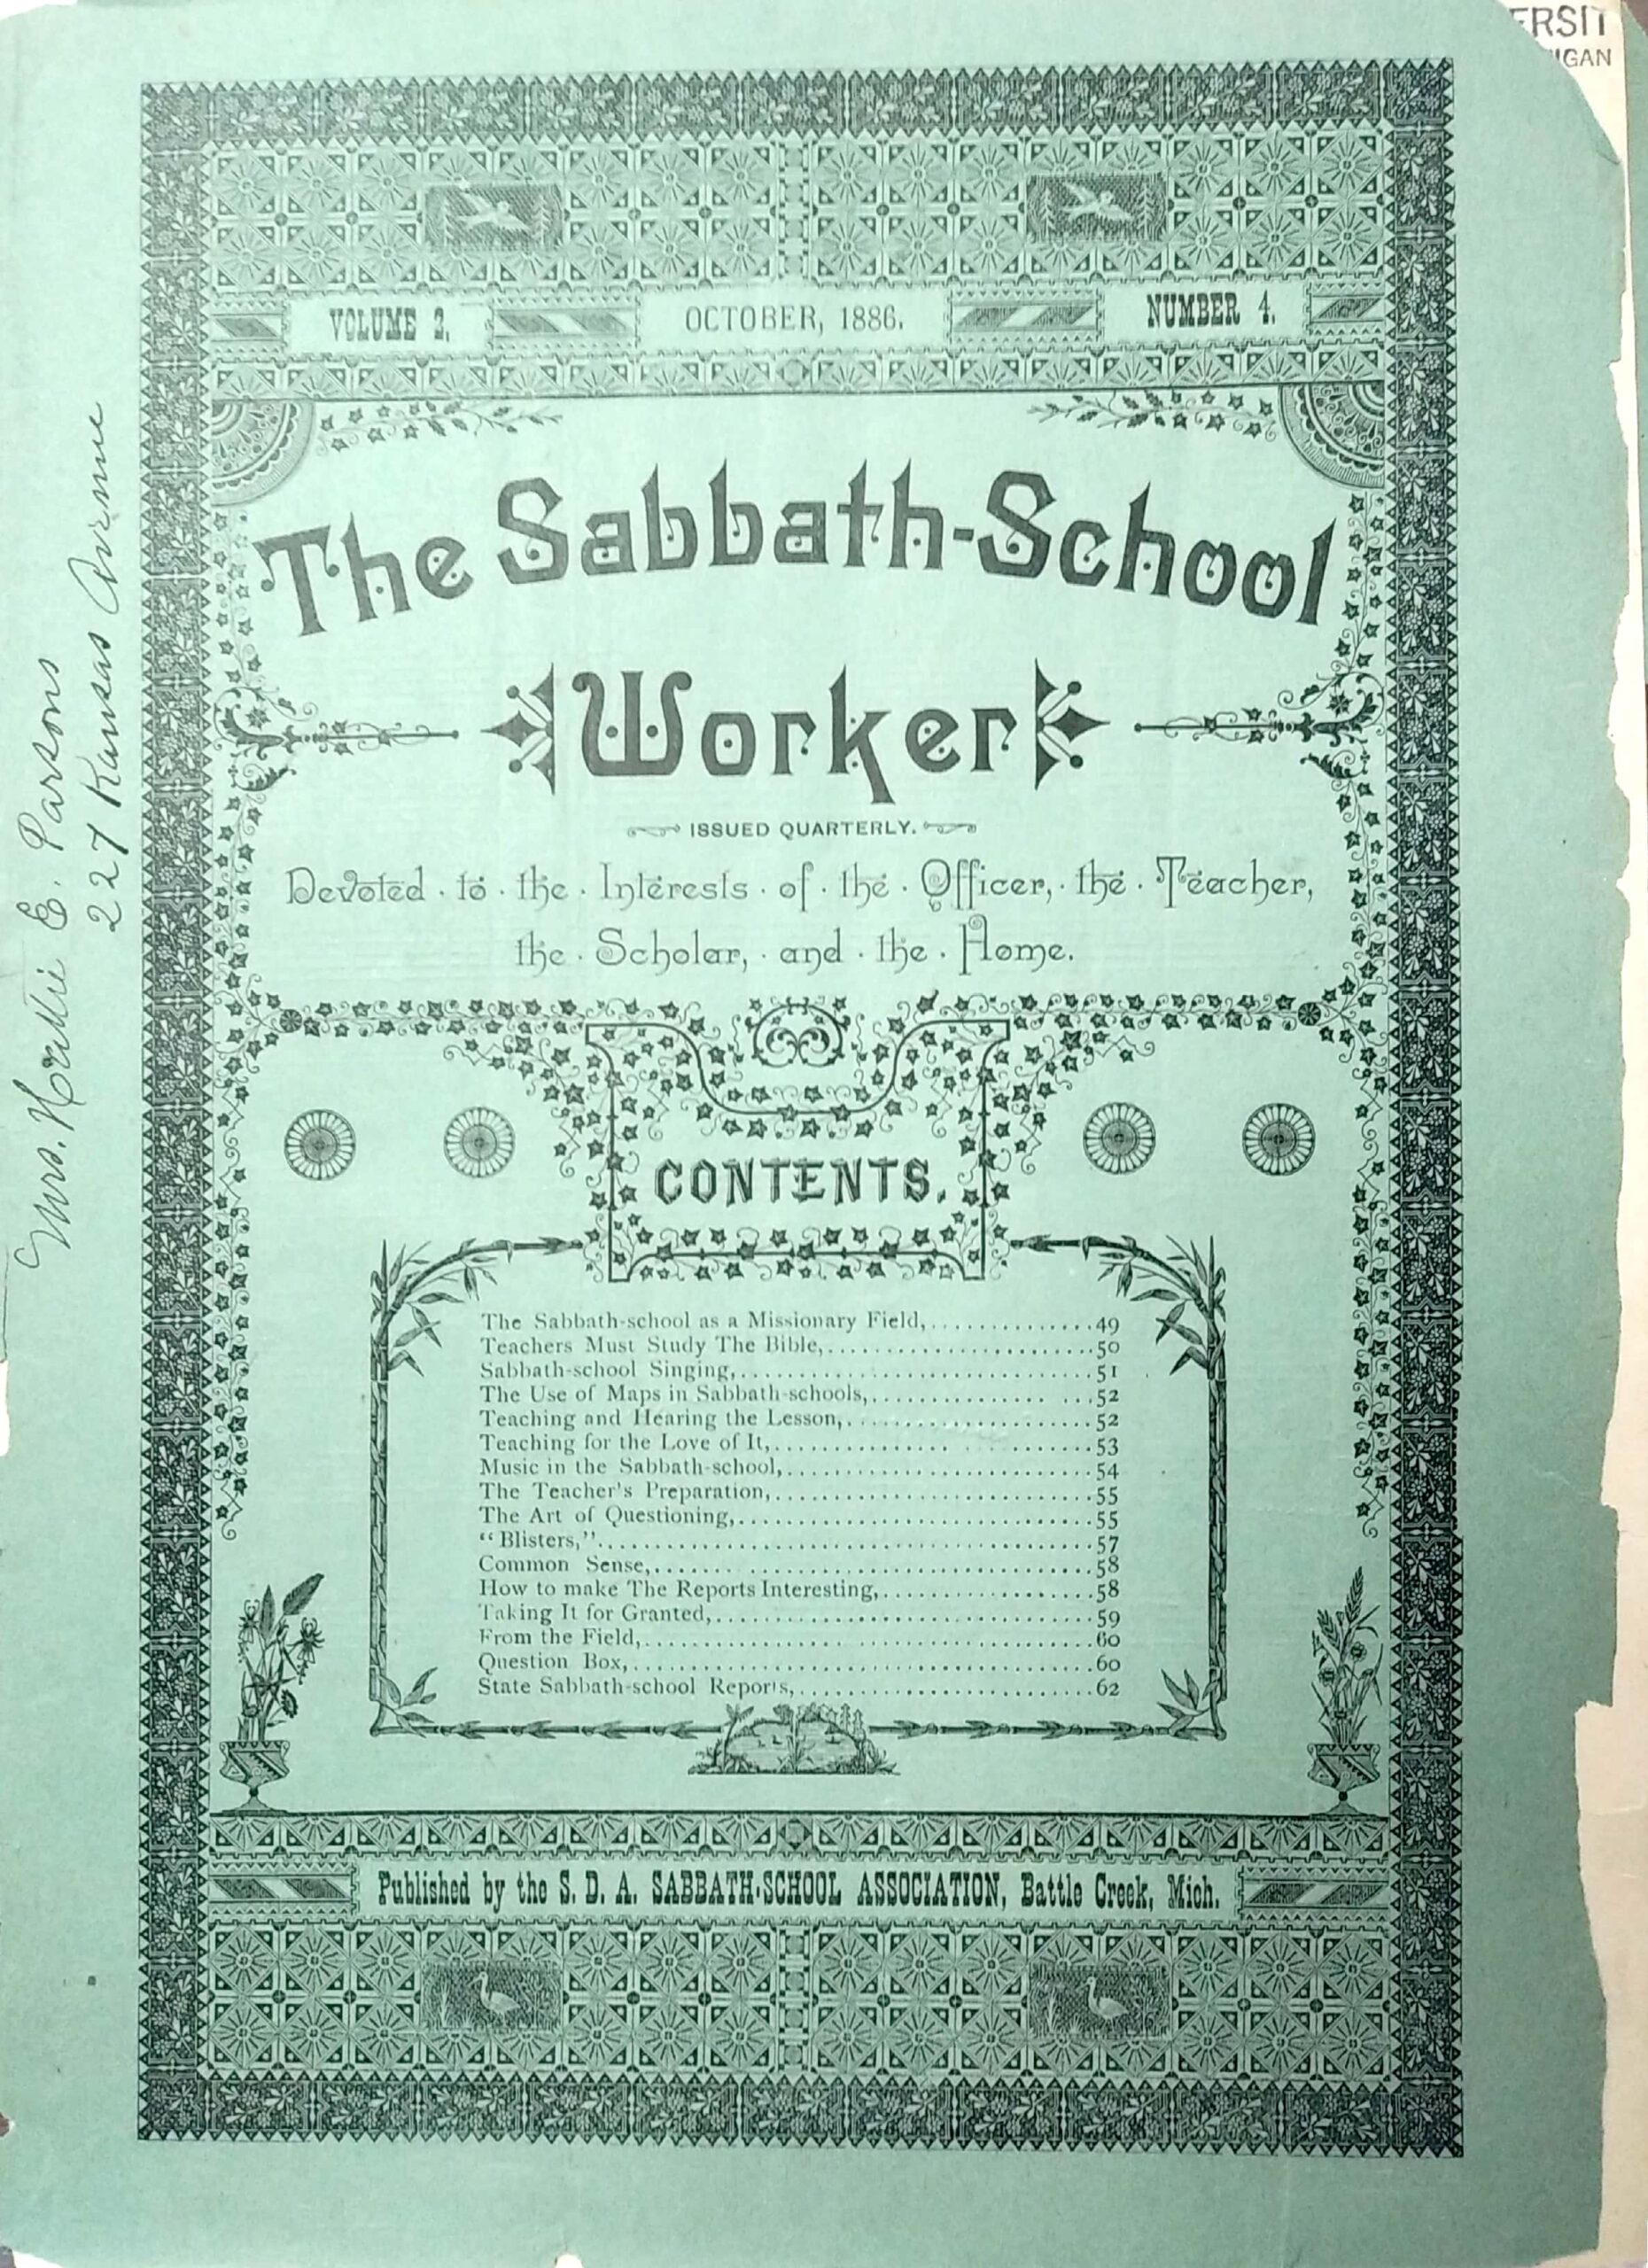 Harmonizing with Trinitarians? – Sabbath School Worker, October 1886: “The Sabbath School as a Missionary Field” by E.G. White